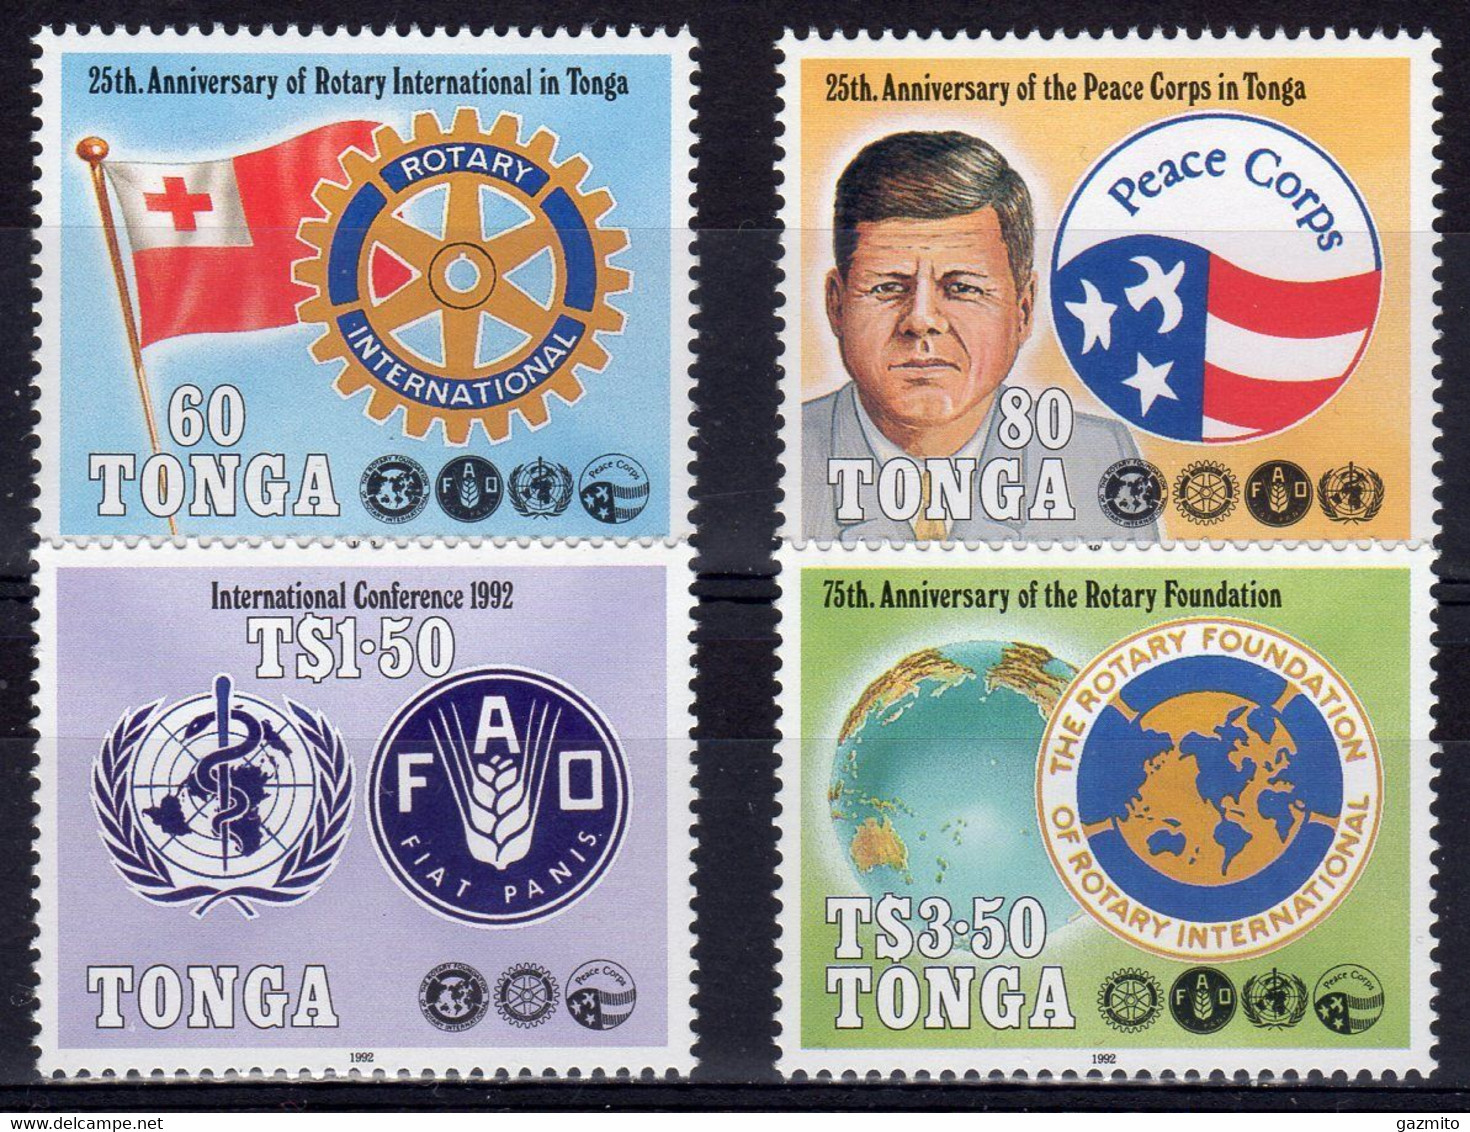 Tonga 1992, Anniversary, Rotary, Kennedy, FAO, WHO, 4val - Against Starve